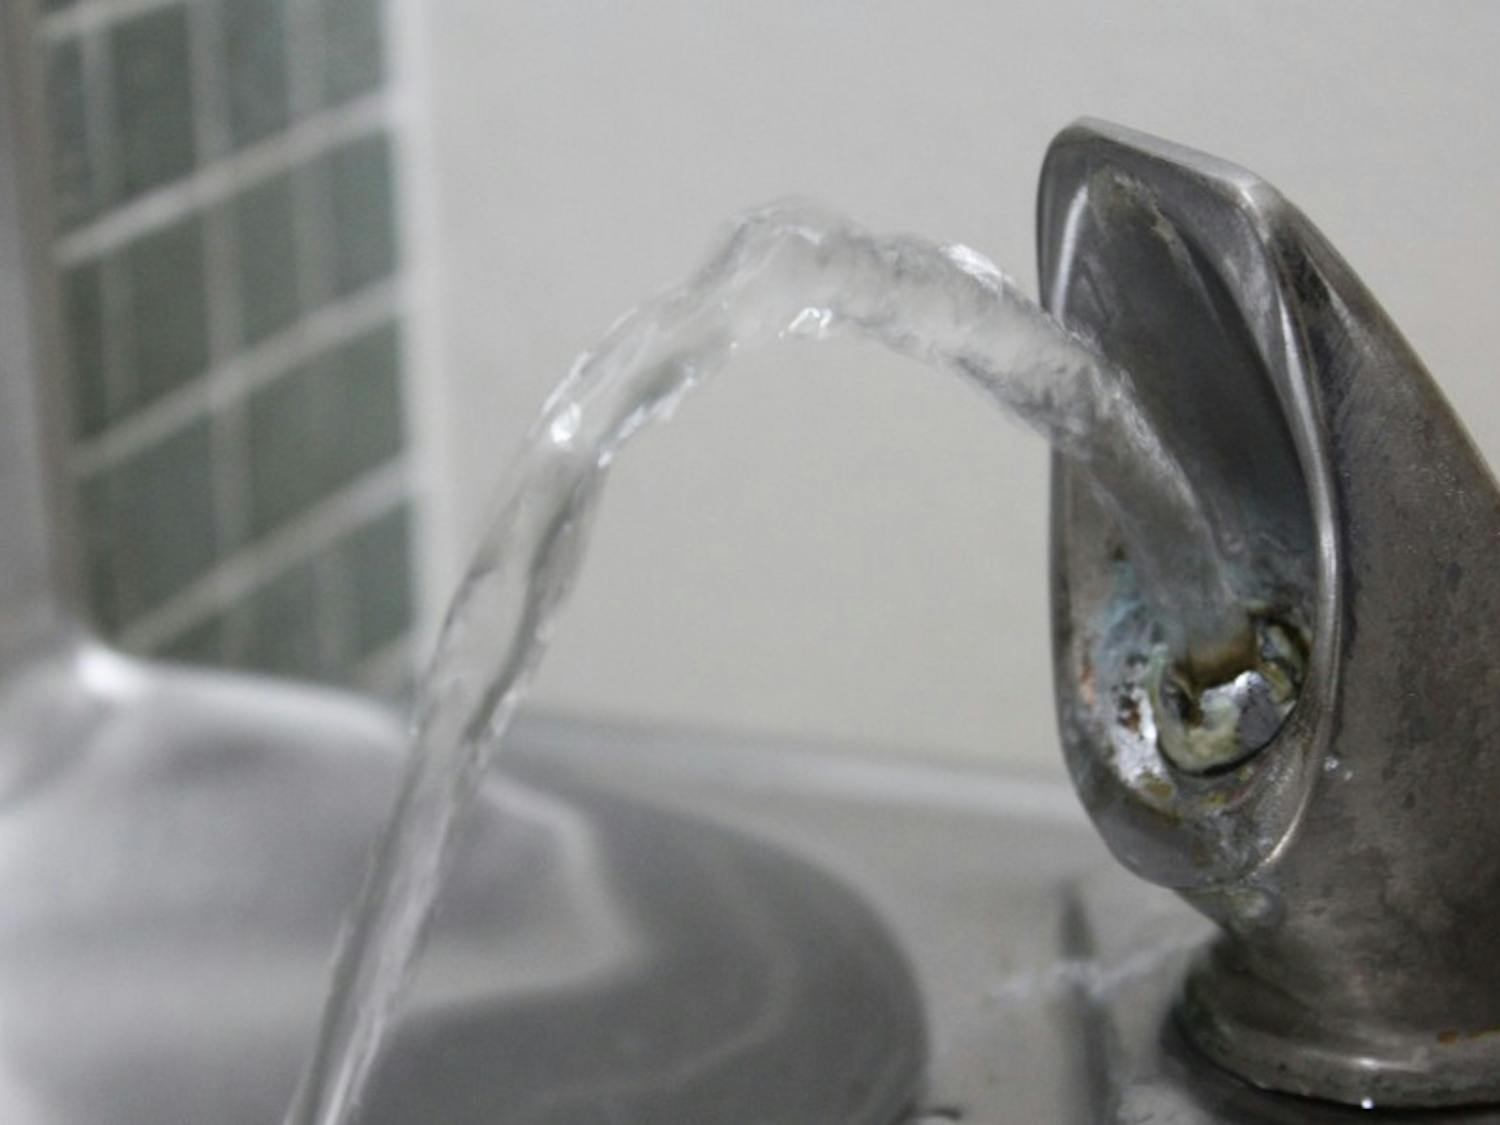 The City of Madison is working with the Wisconsin Air National Guard to clean up the water supply after it was contaminated by substances originating at the National Guard’s base at Truax Field, Mayor Paul Soglin said.